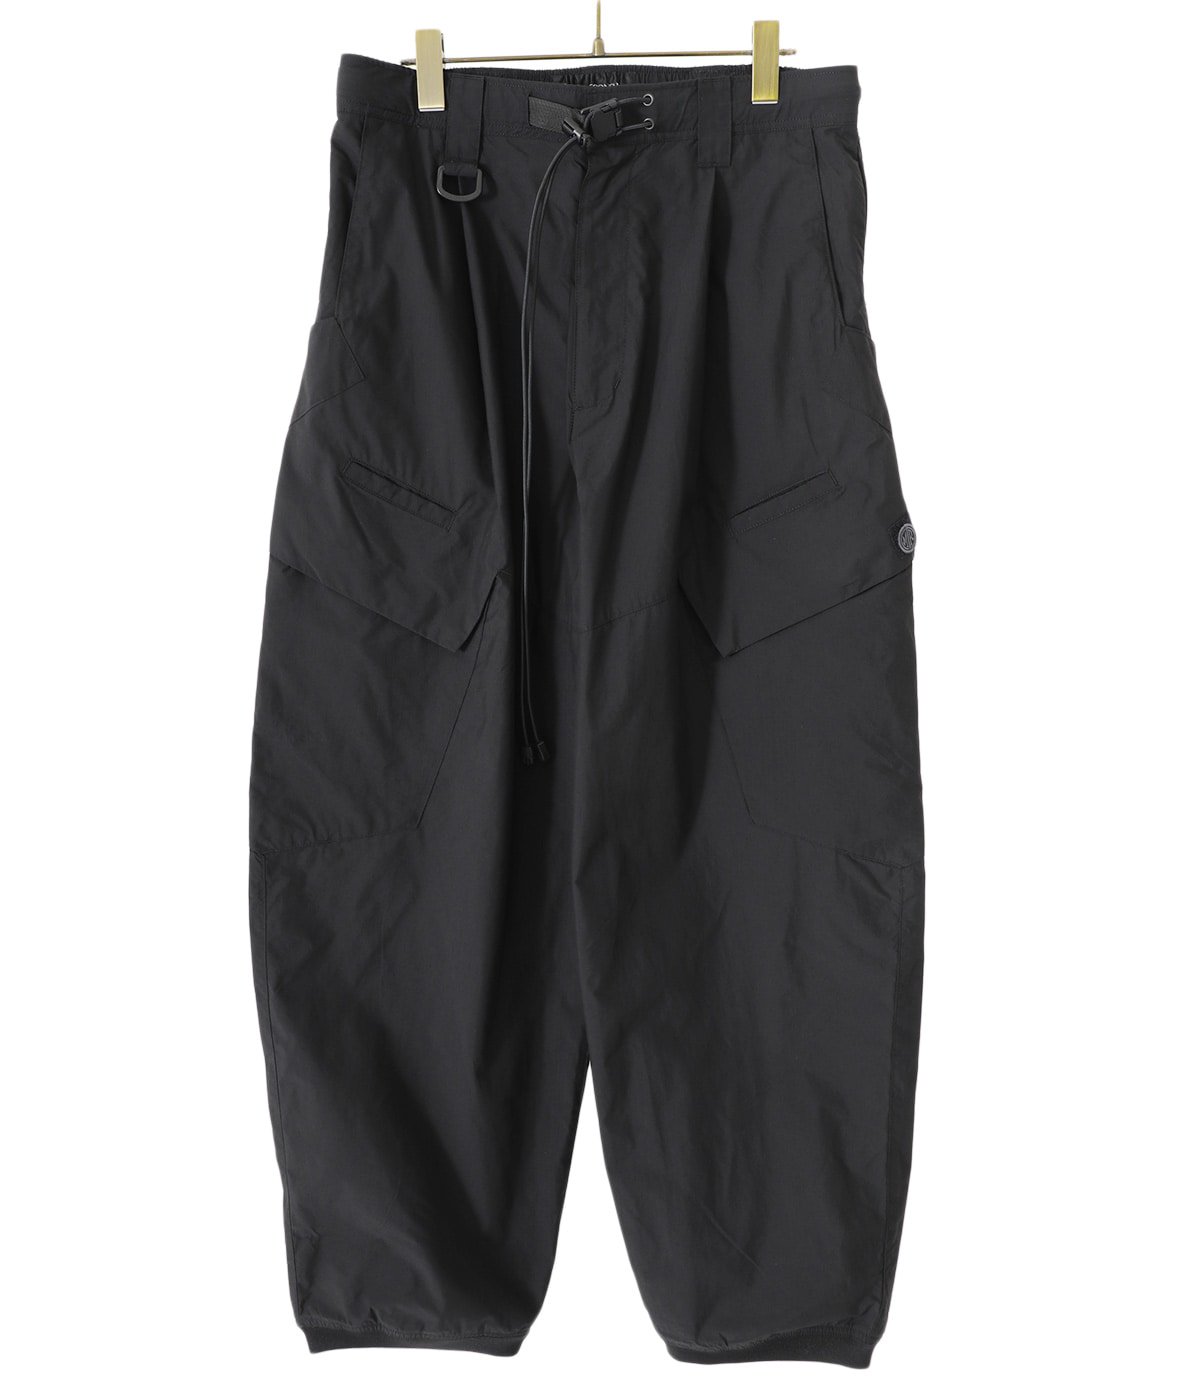 SUMMERWEIGHT MDU PANTS GEN II | MOUT RECON TAILOR(マウトリーコン